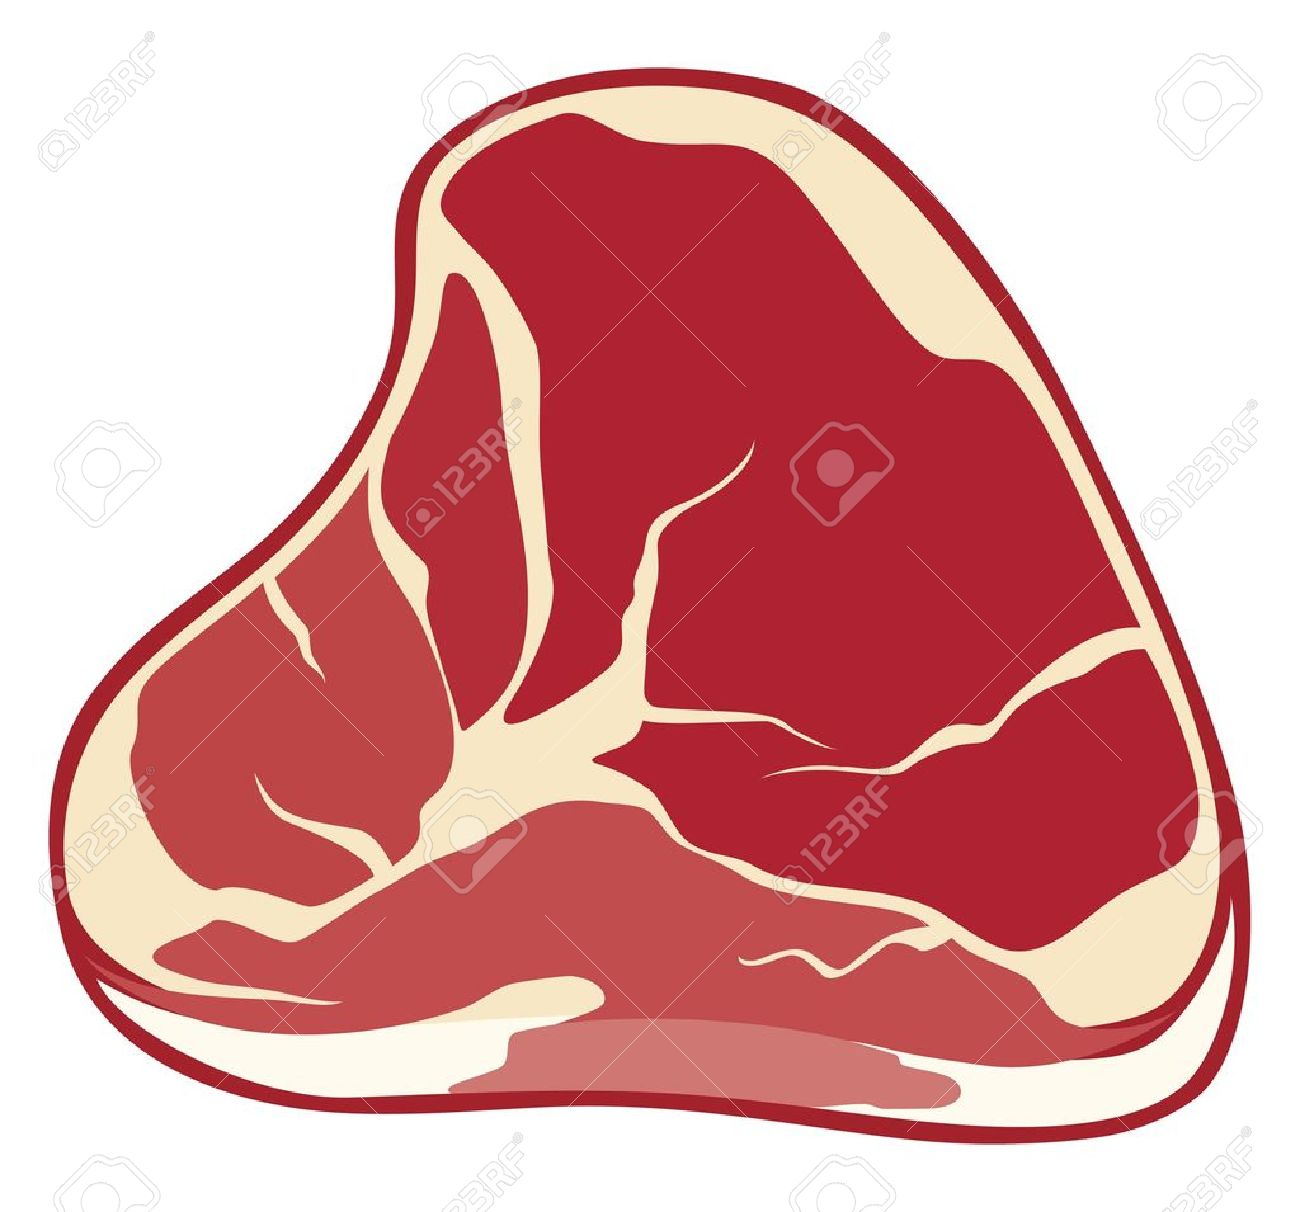 meat raffle clipart - photo #34